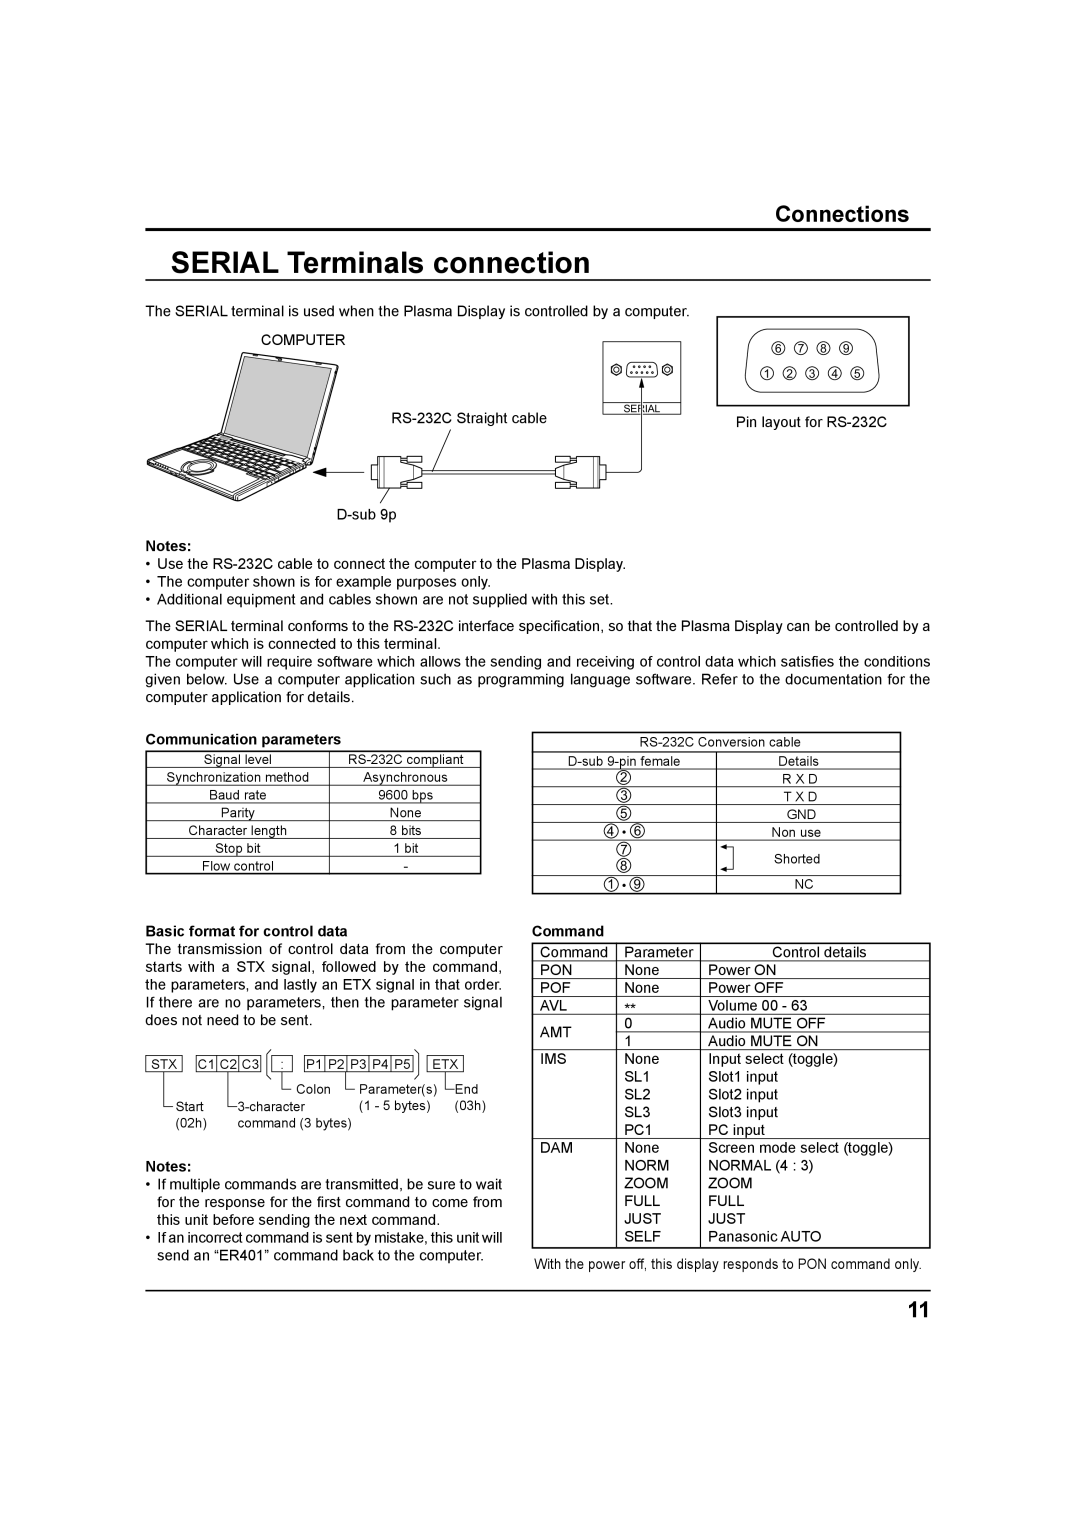 Panasonic TH 42PH9UK Serial Terminals connection, Communication parameters, Basic format for control data, Command 